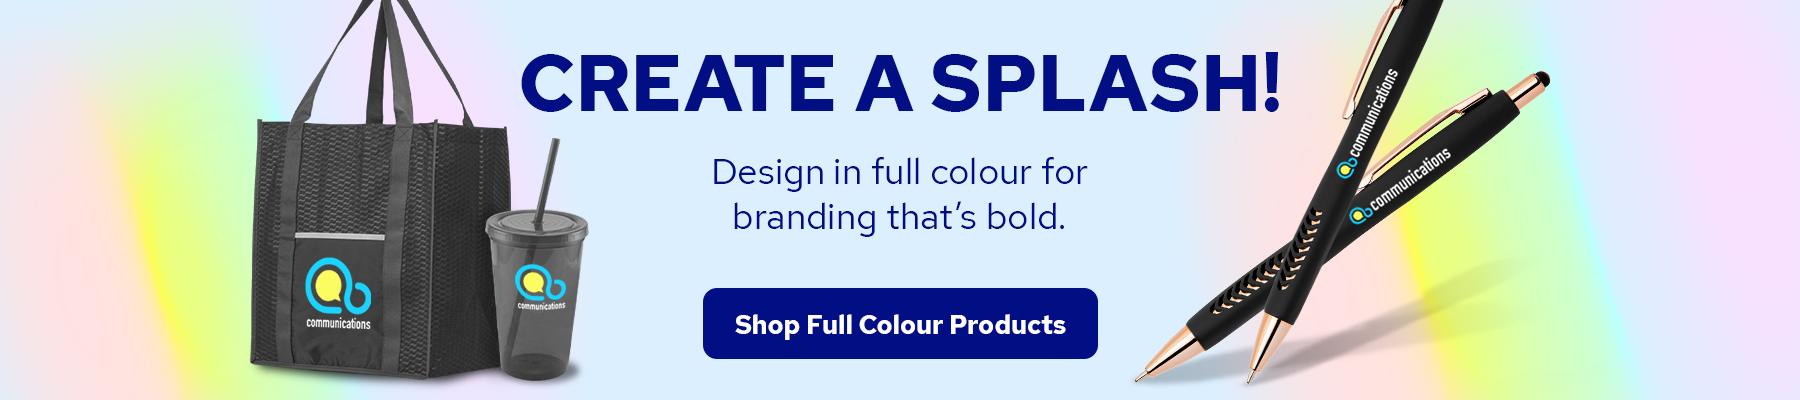 Create a Splash! Design in full colour for branding that's bold. | Shop Full Colour Products